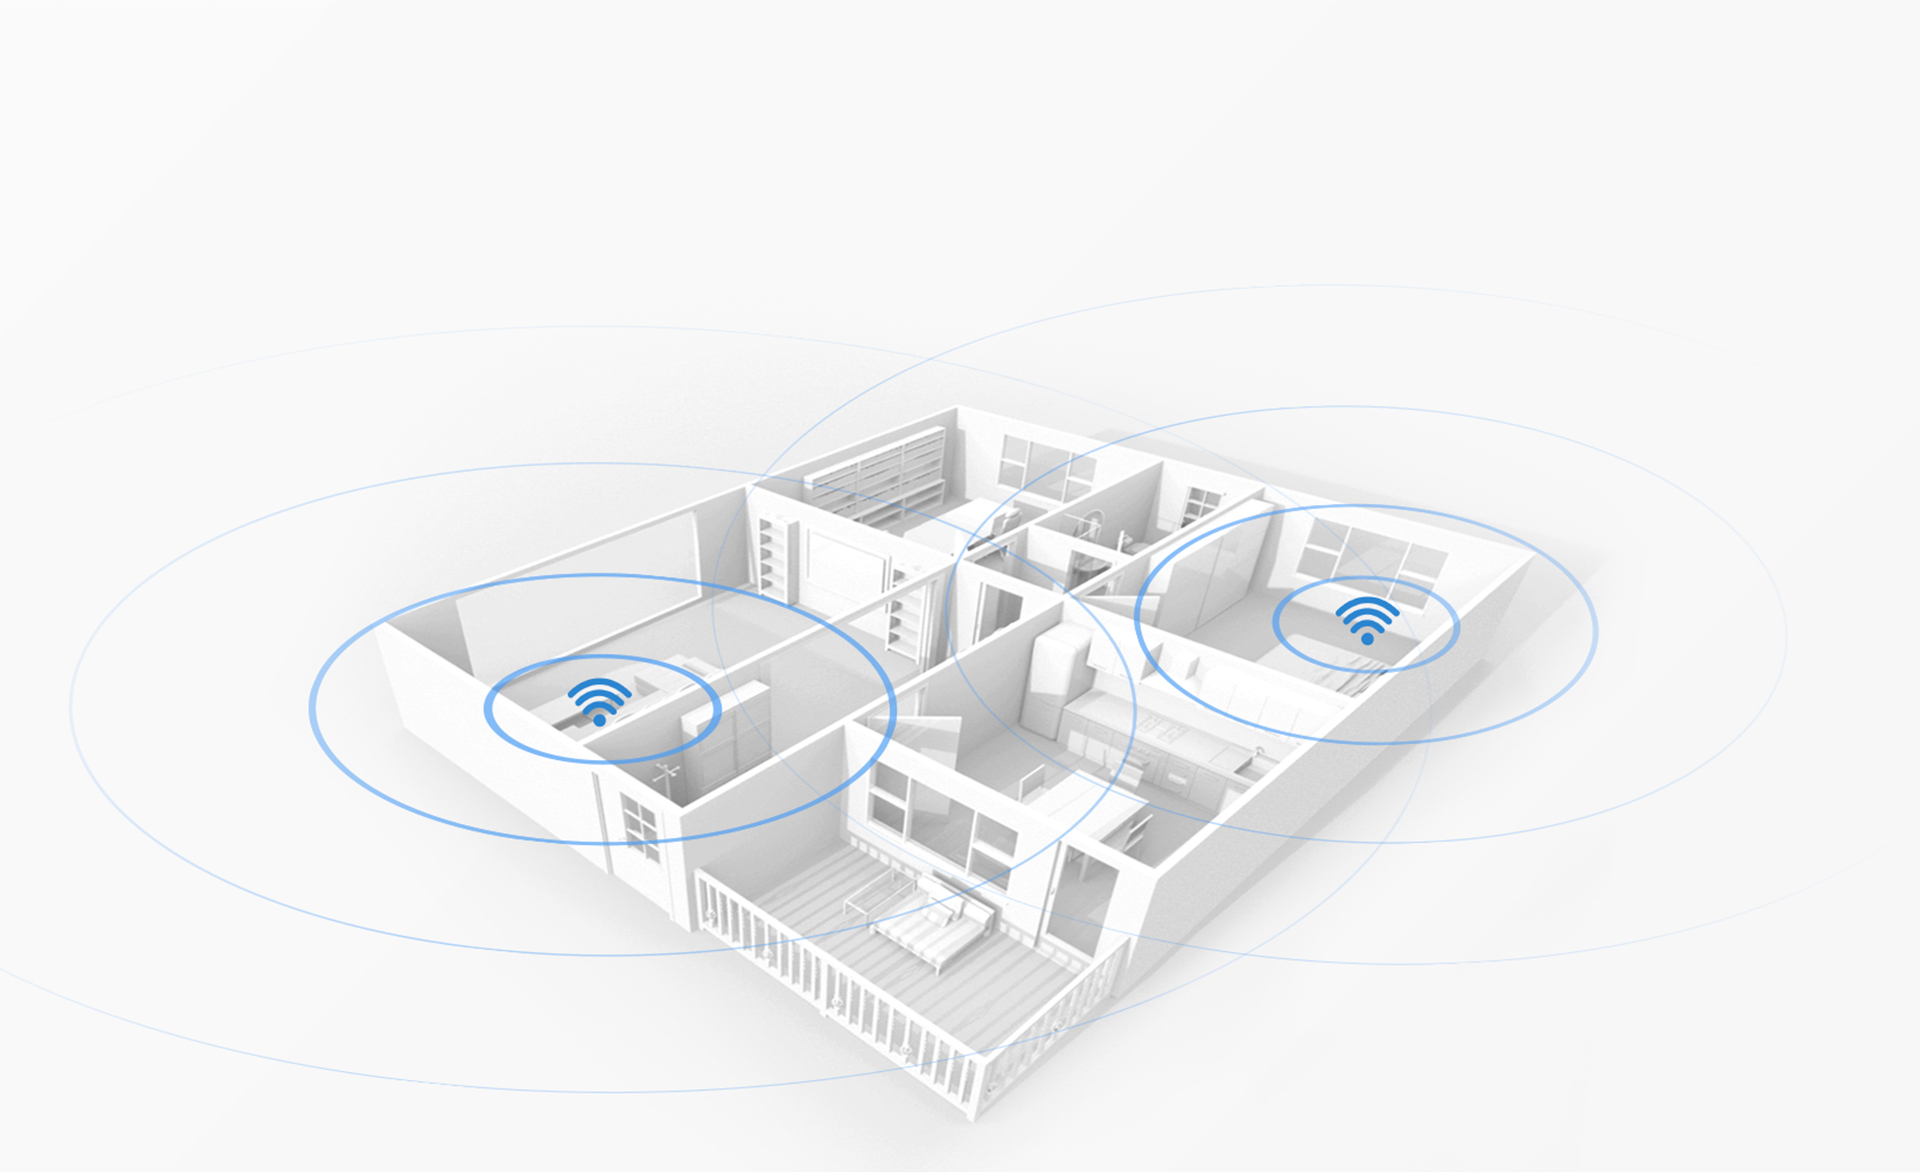 Multi-router mesh networking enables greater Wi-Fi coverage